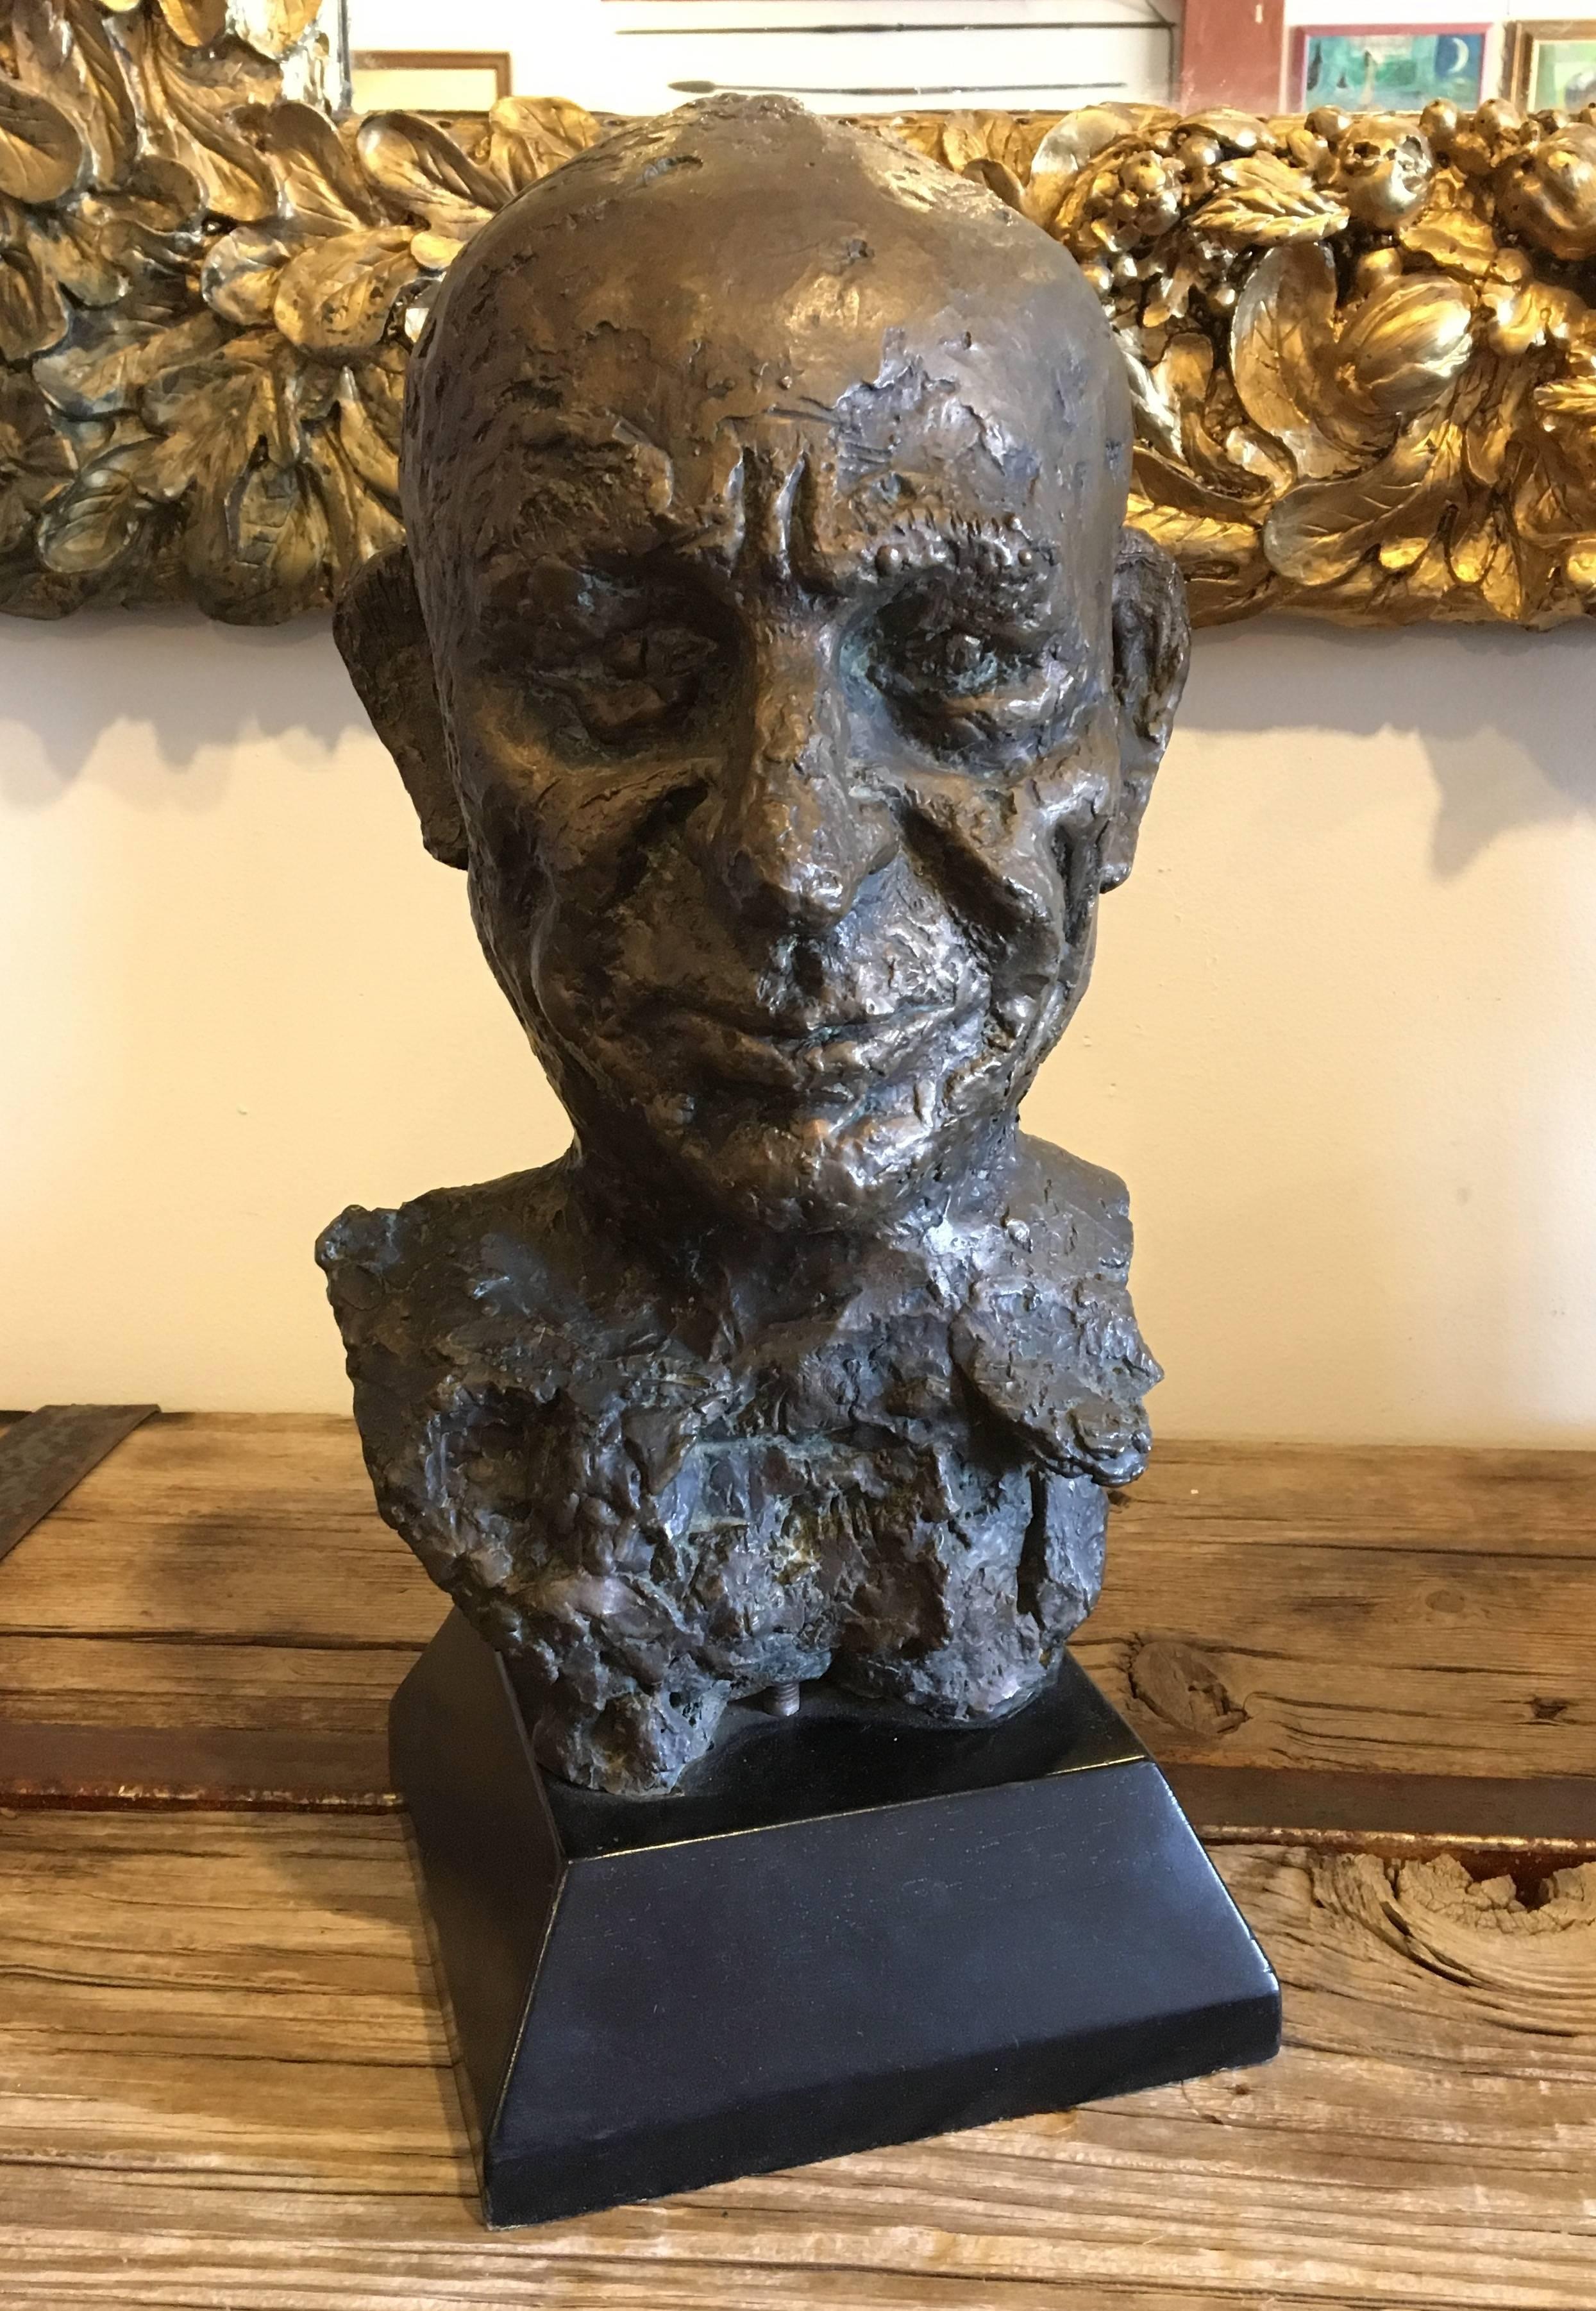 Offering this bronze bust of a man with an unusual, strong face. Overall dimensions: 19